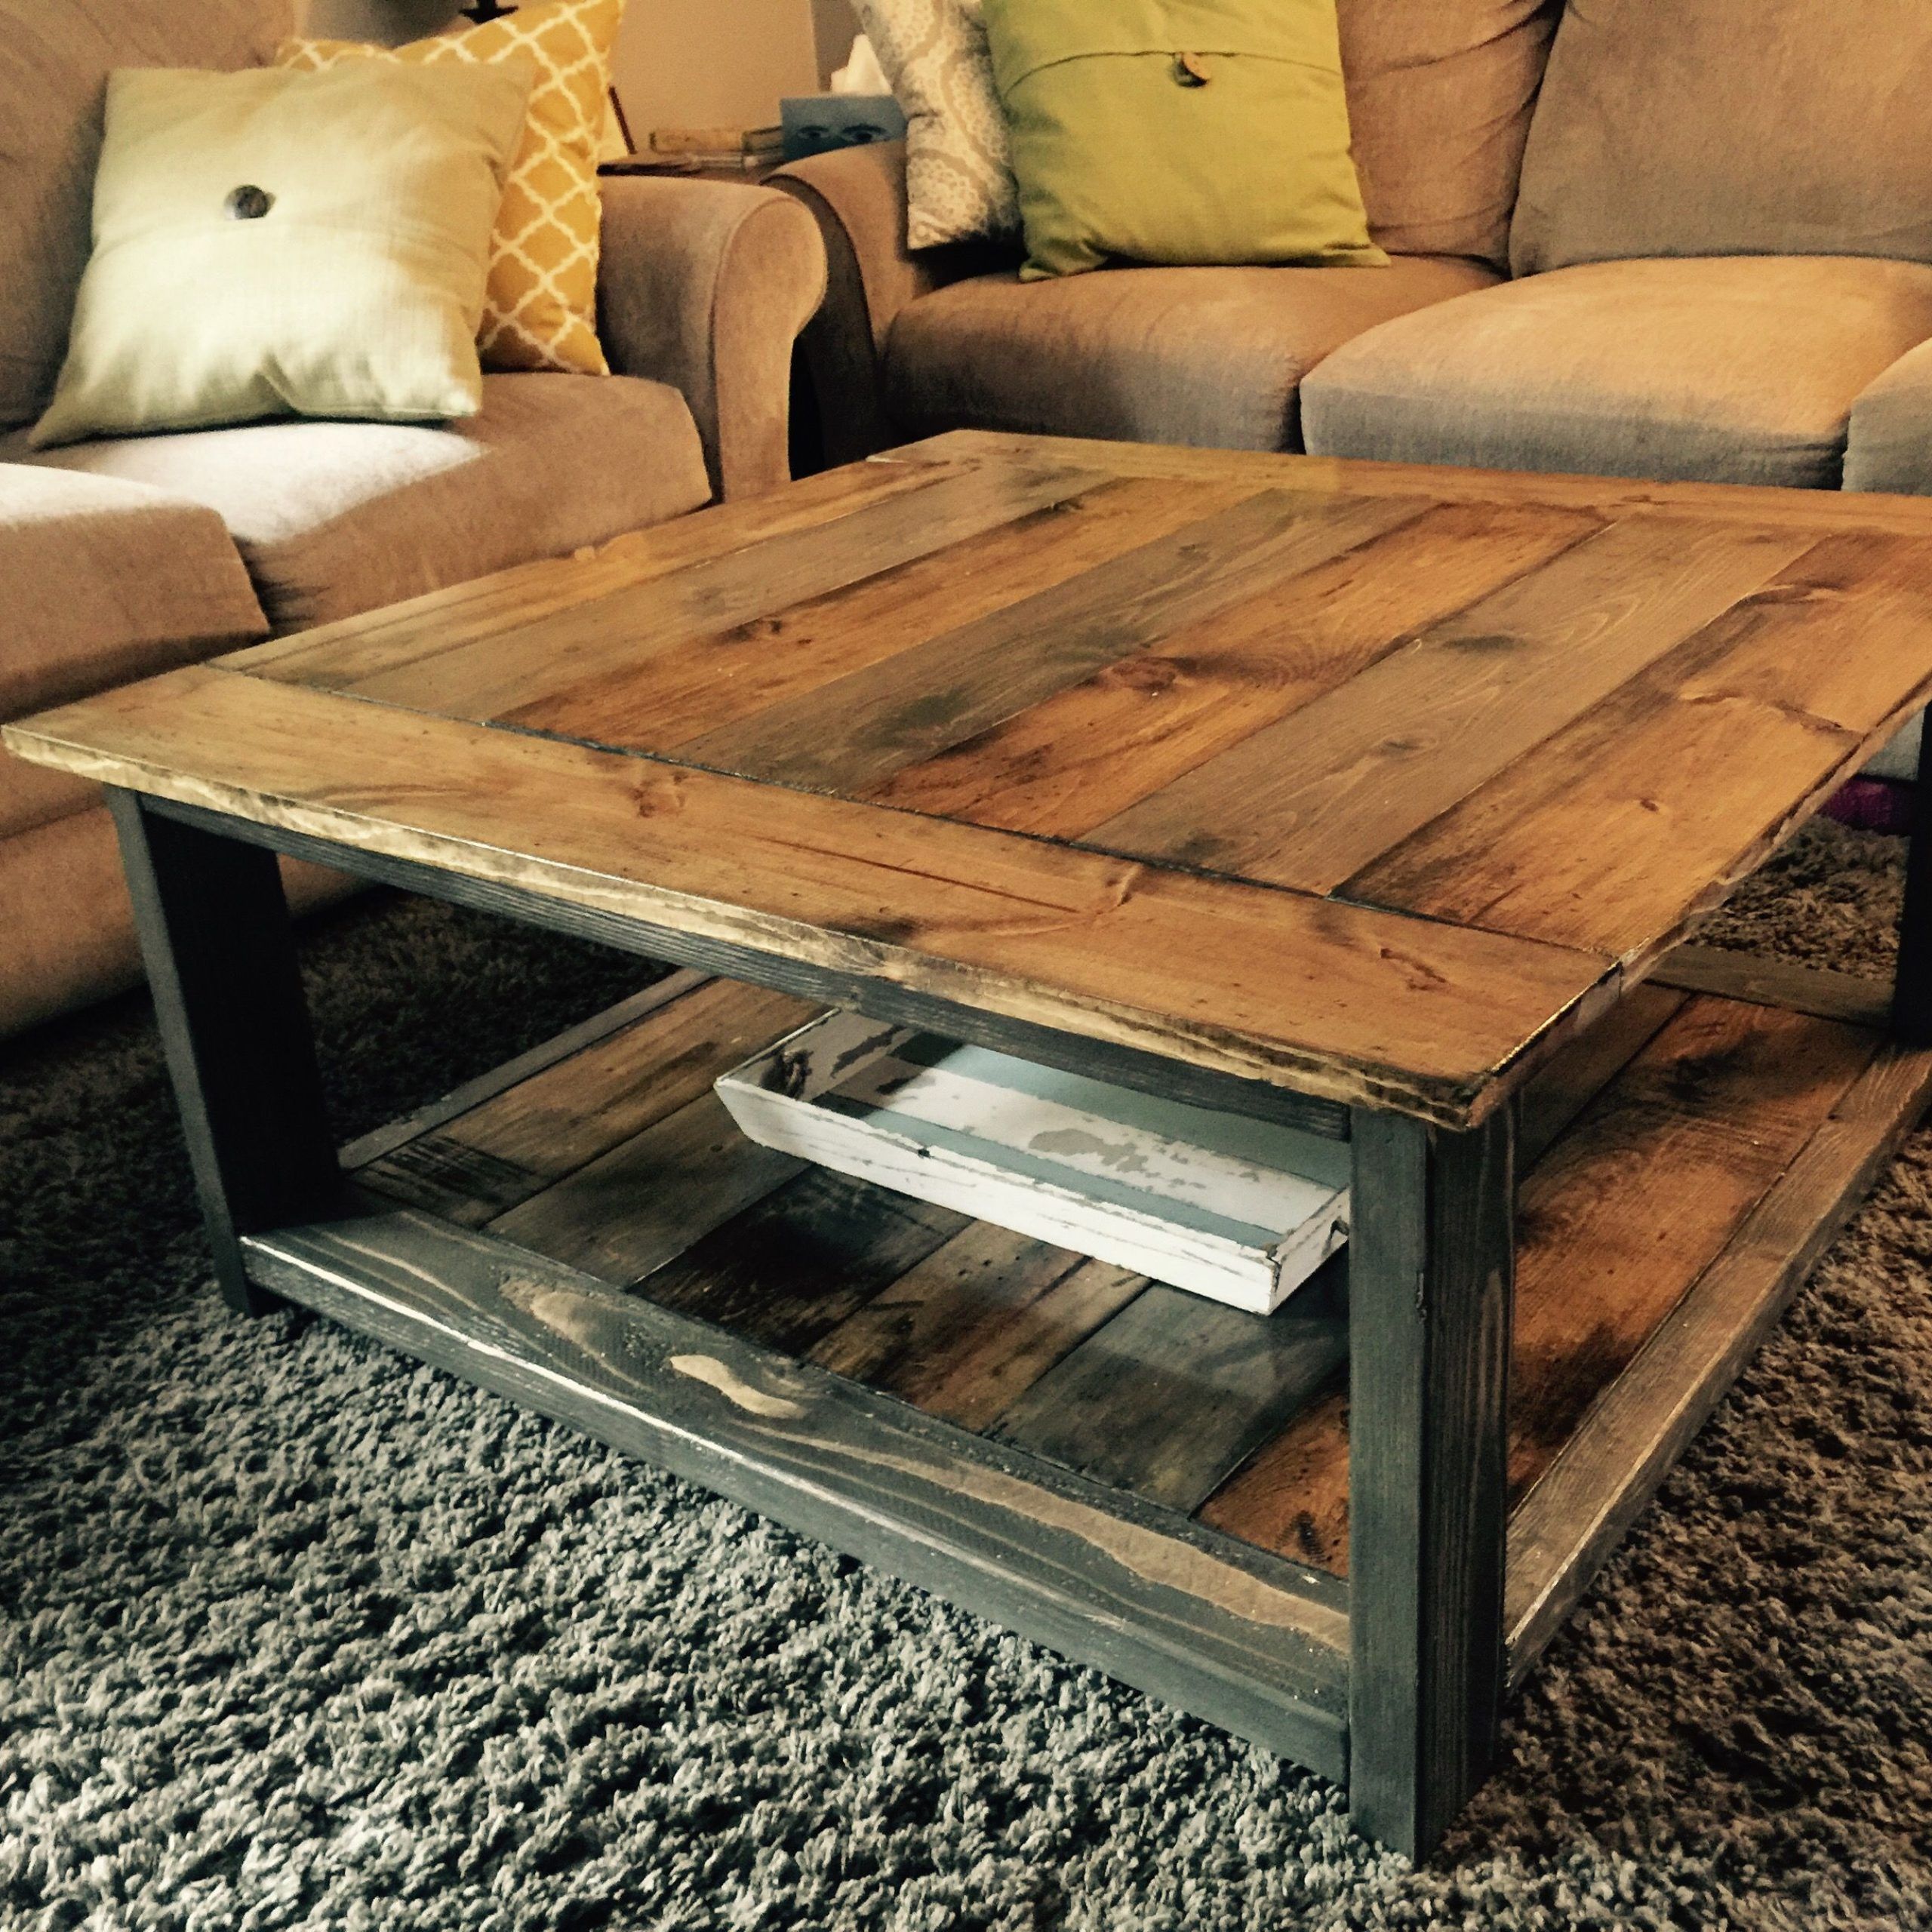 Rustic Xless Coffee Table | Do It Yourself Home Projects From Ana White Within Rustic Wood Coffee Tables (View 9 of 15)